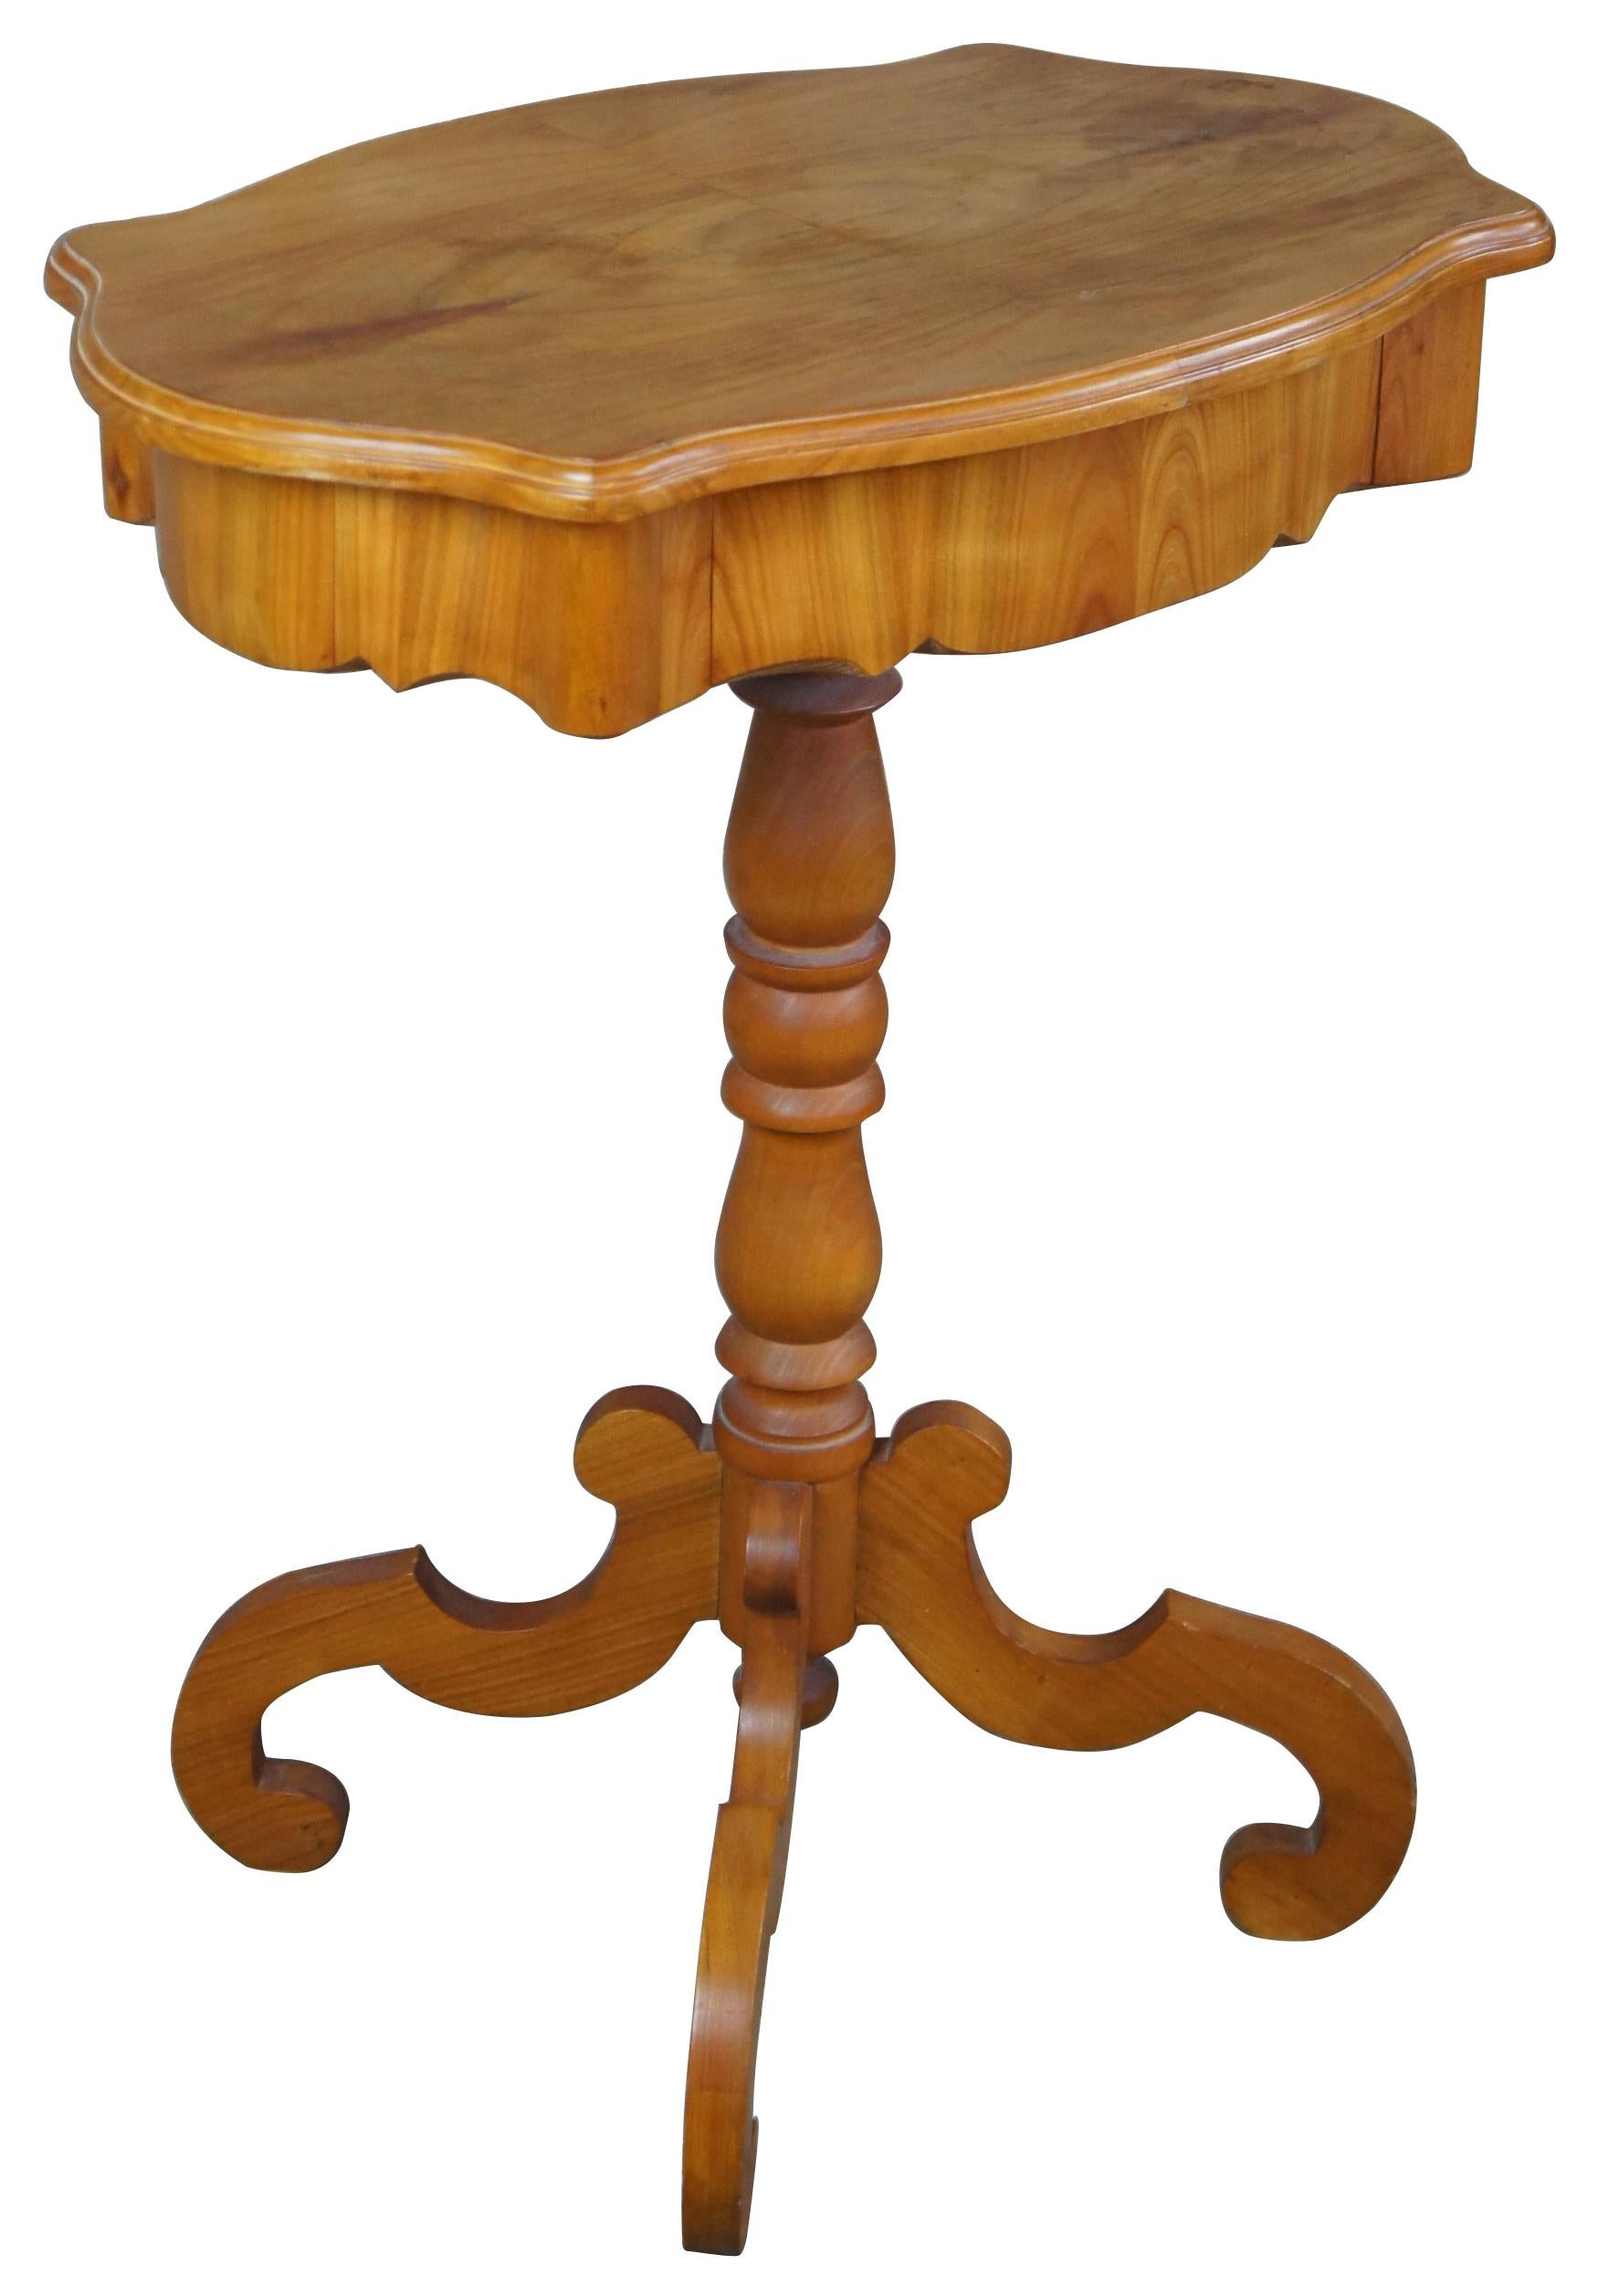 20th century French turtle top side table with drawer. Features a turned center support, scrolled legs and scalloped shape.